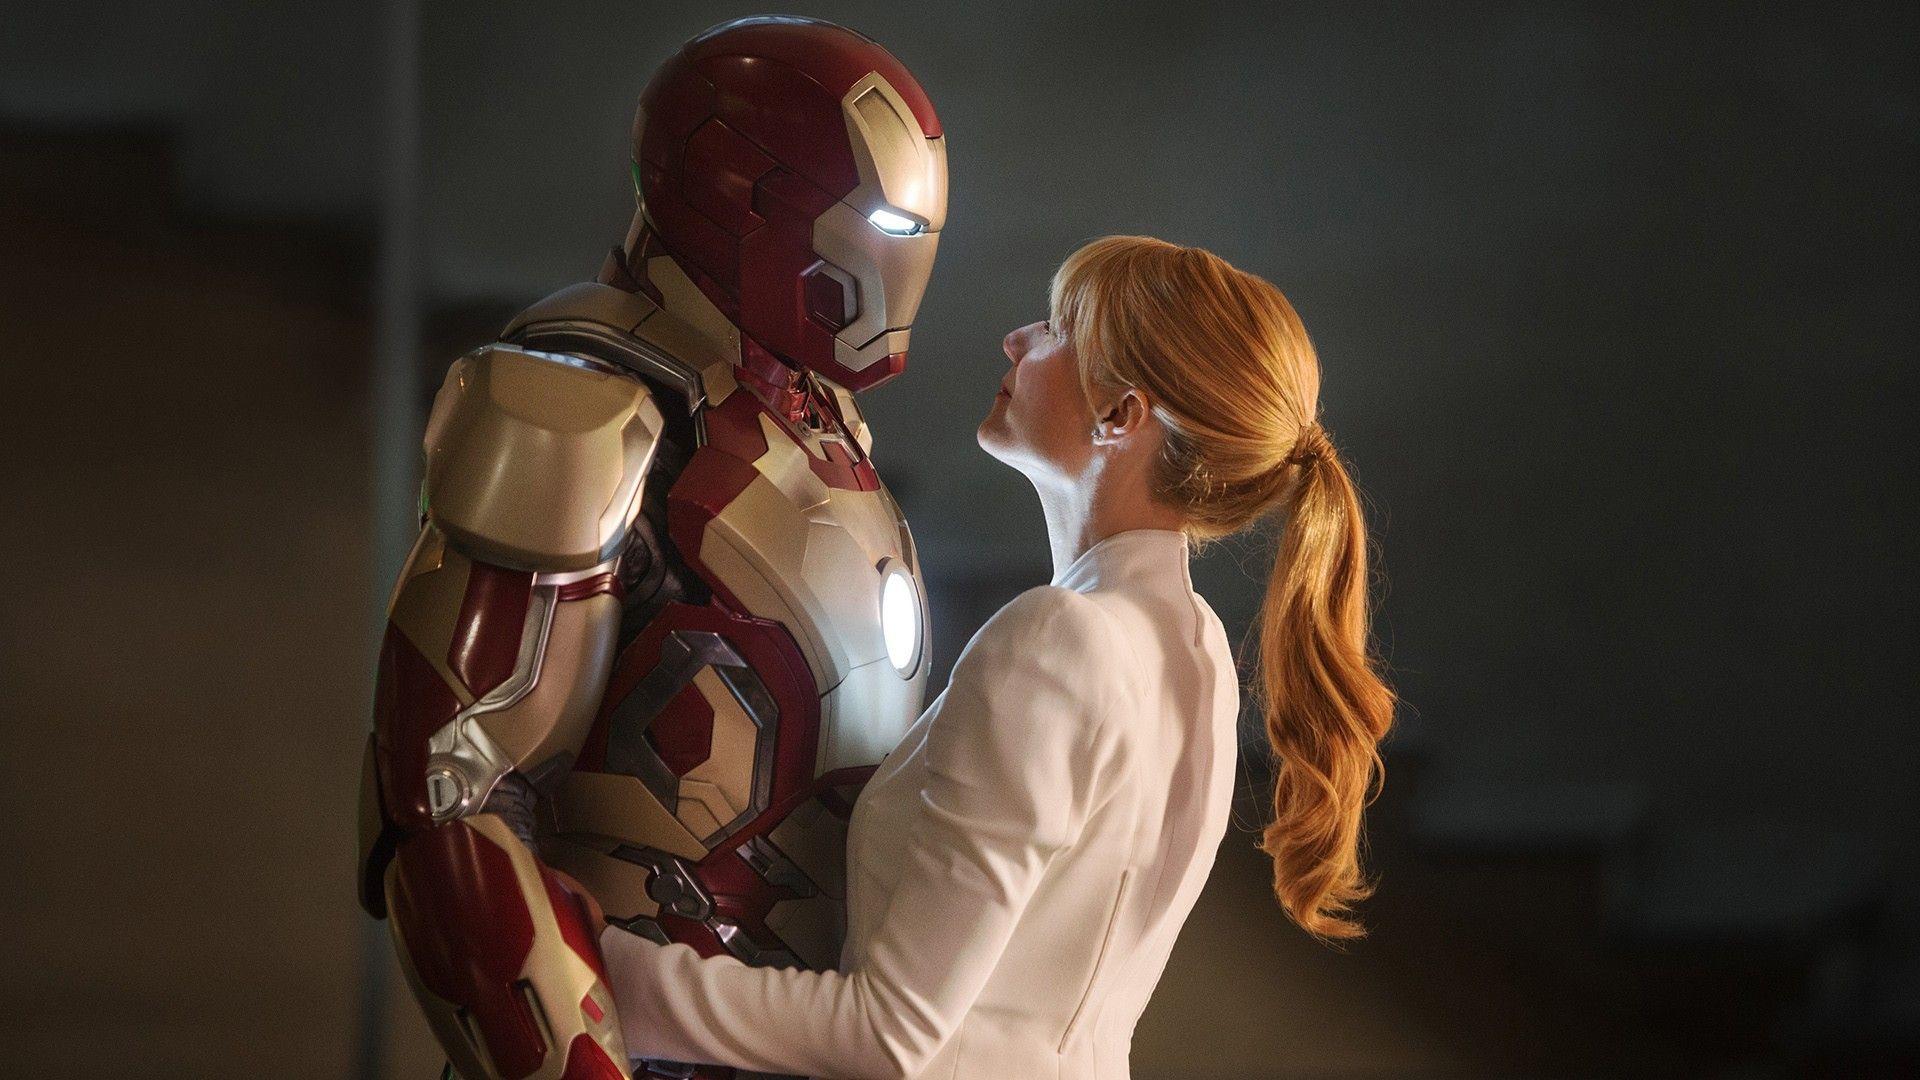 Gwyneth Paltrow Iron Man Wallpapers Wallpaper Cave Images, Photos, Reviews